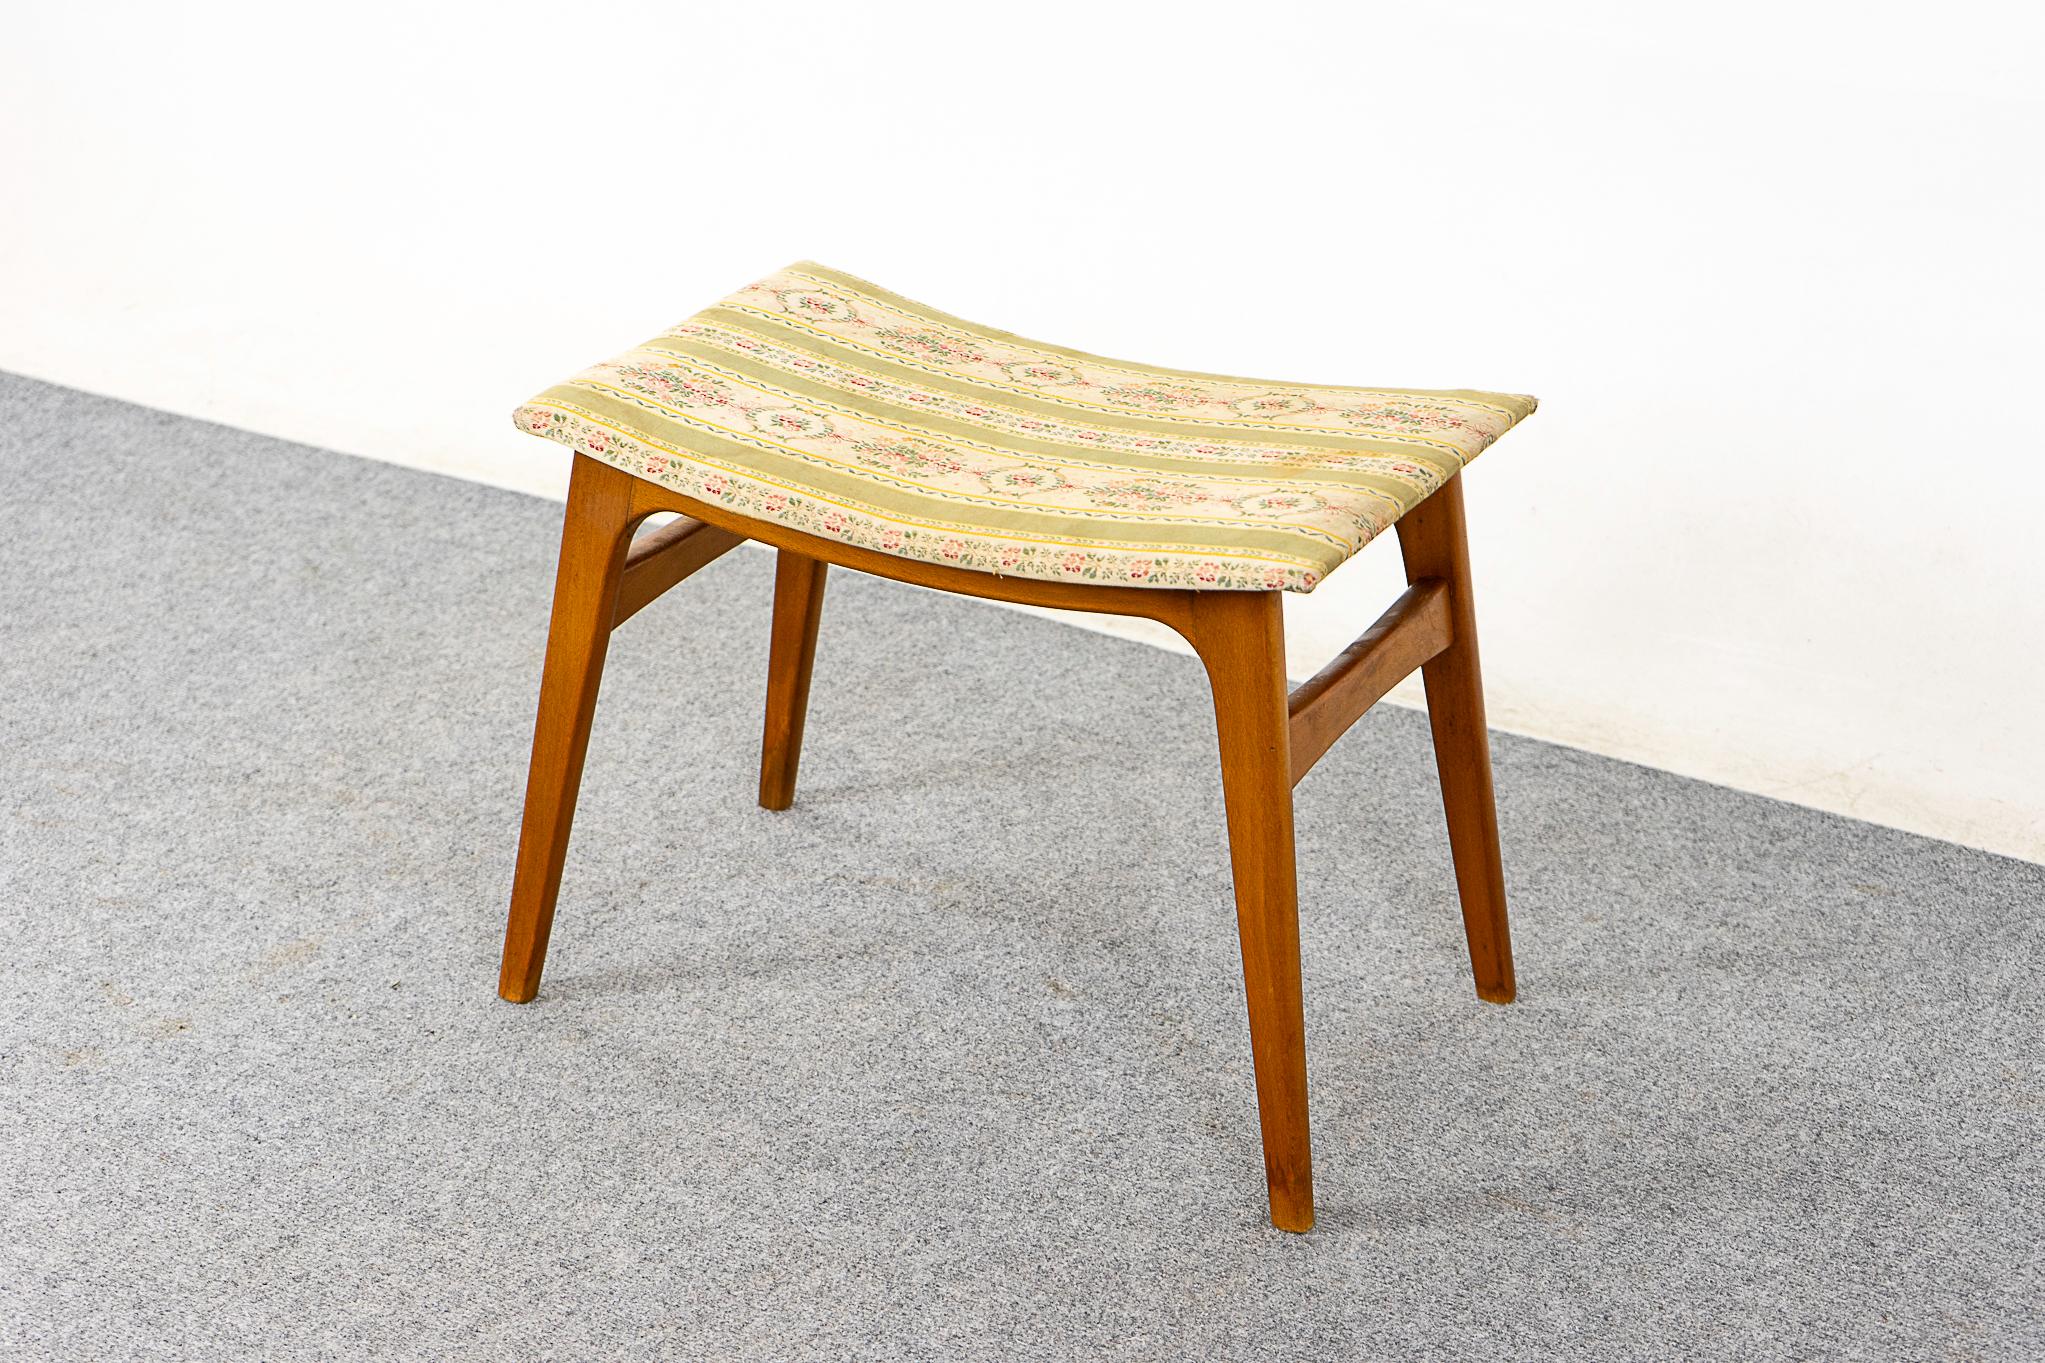 Beech Danish footstool, circa 1960's. Splayed tapering legs, cross supports and original upholstery with wear.